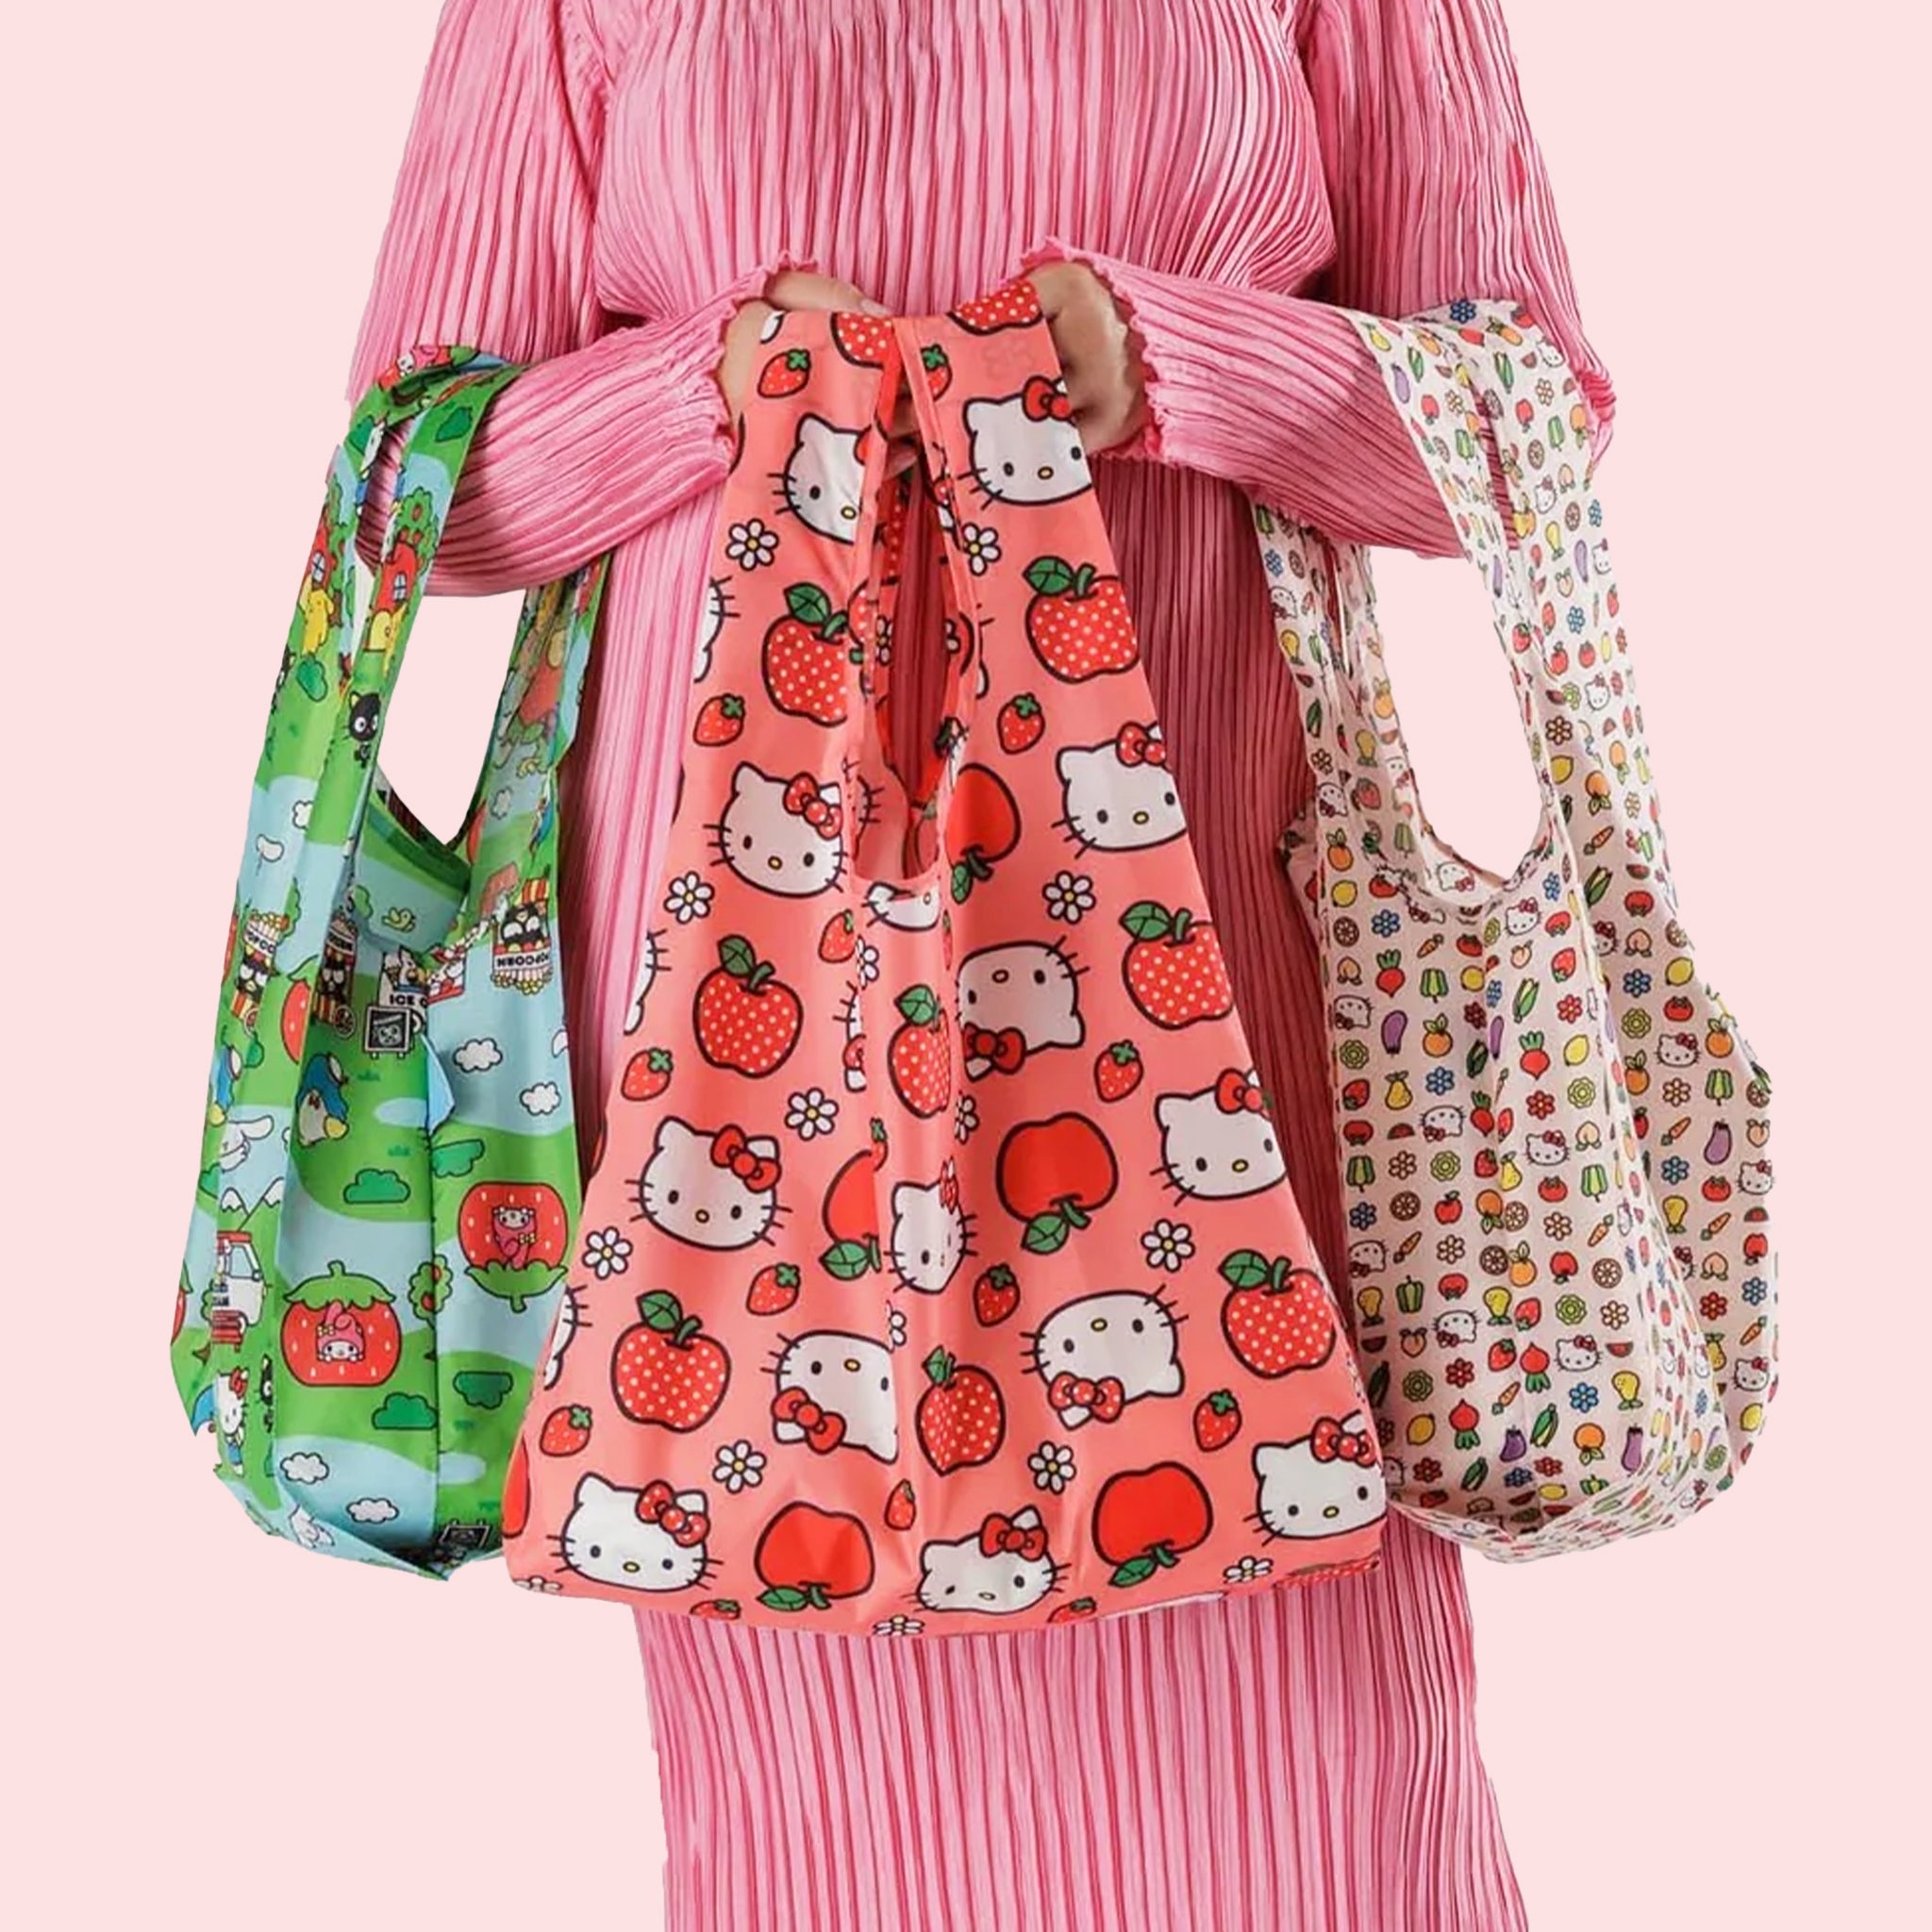 A set of three standard Baggu tote bags with three different Hello Kitty prints on them.